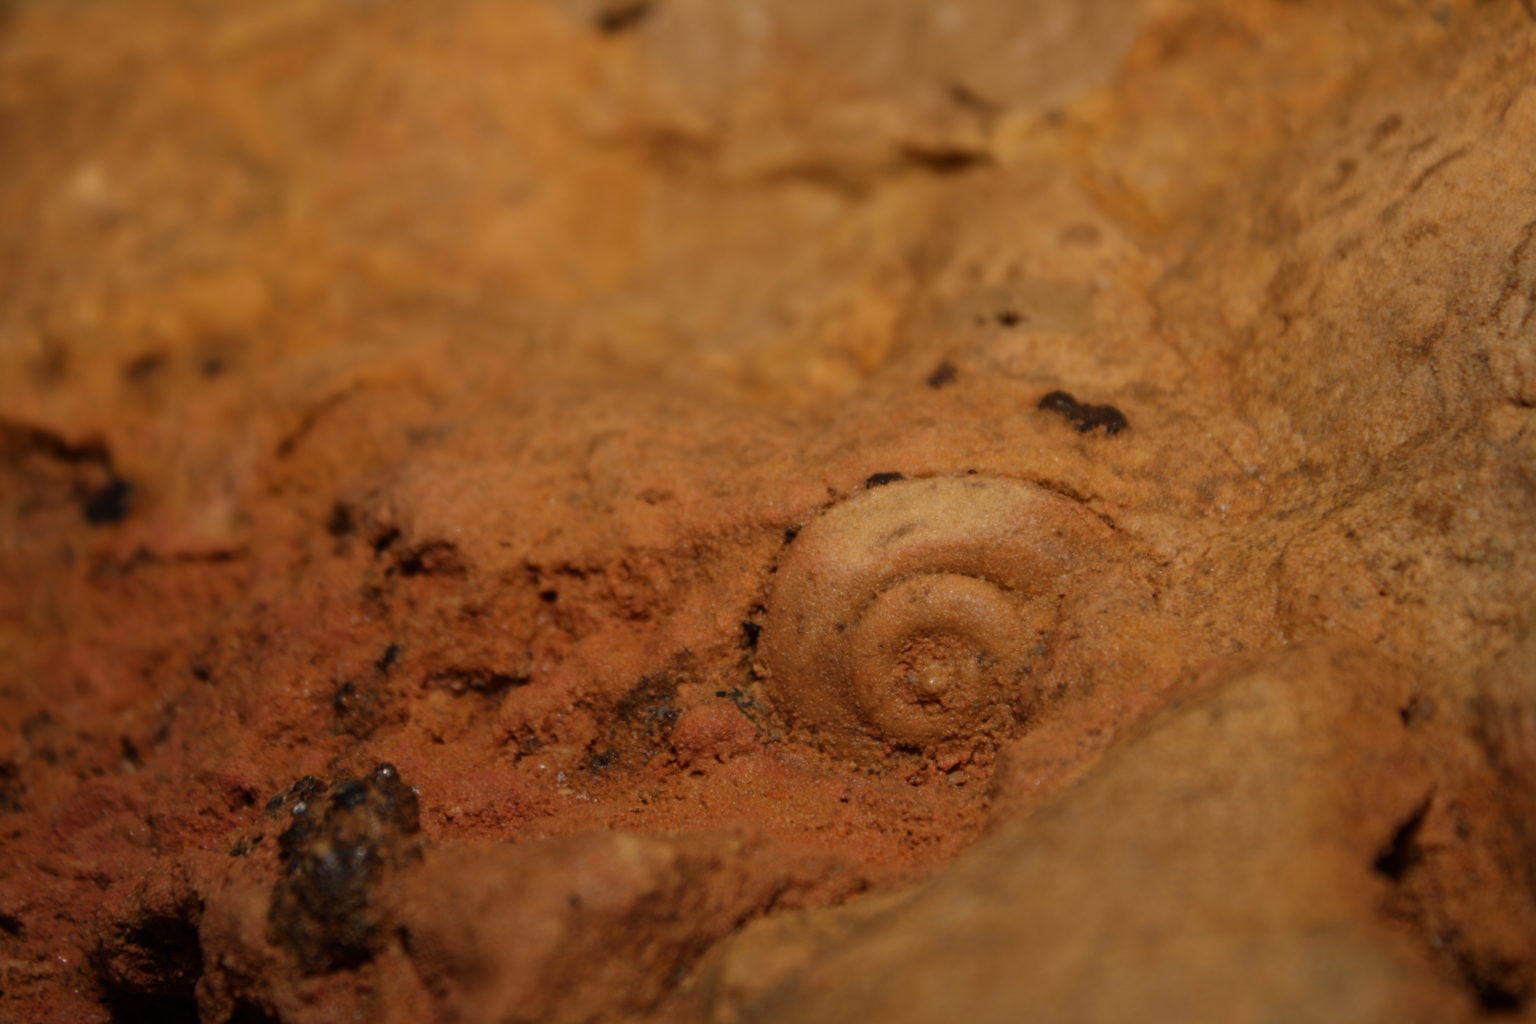 Gastropod fossil in the limestone of the cave walls